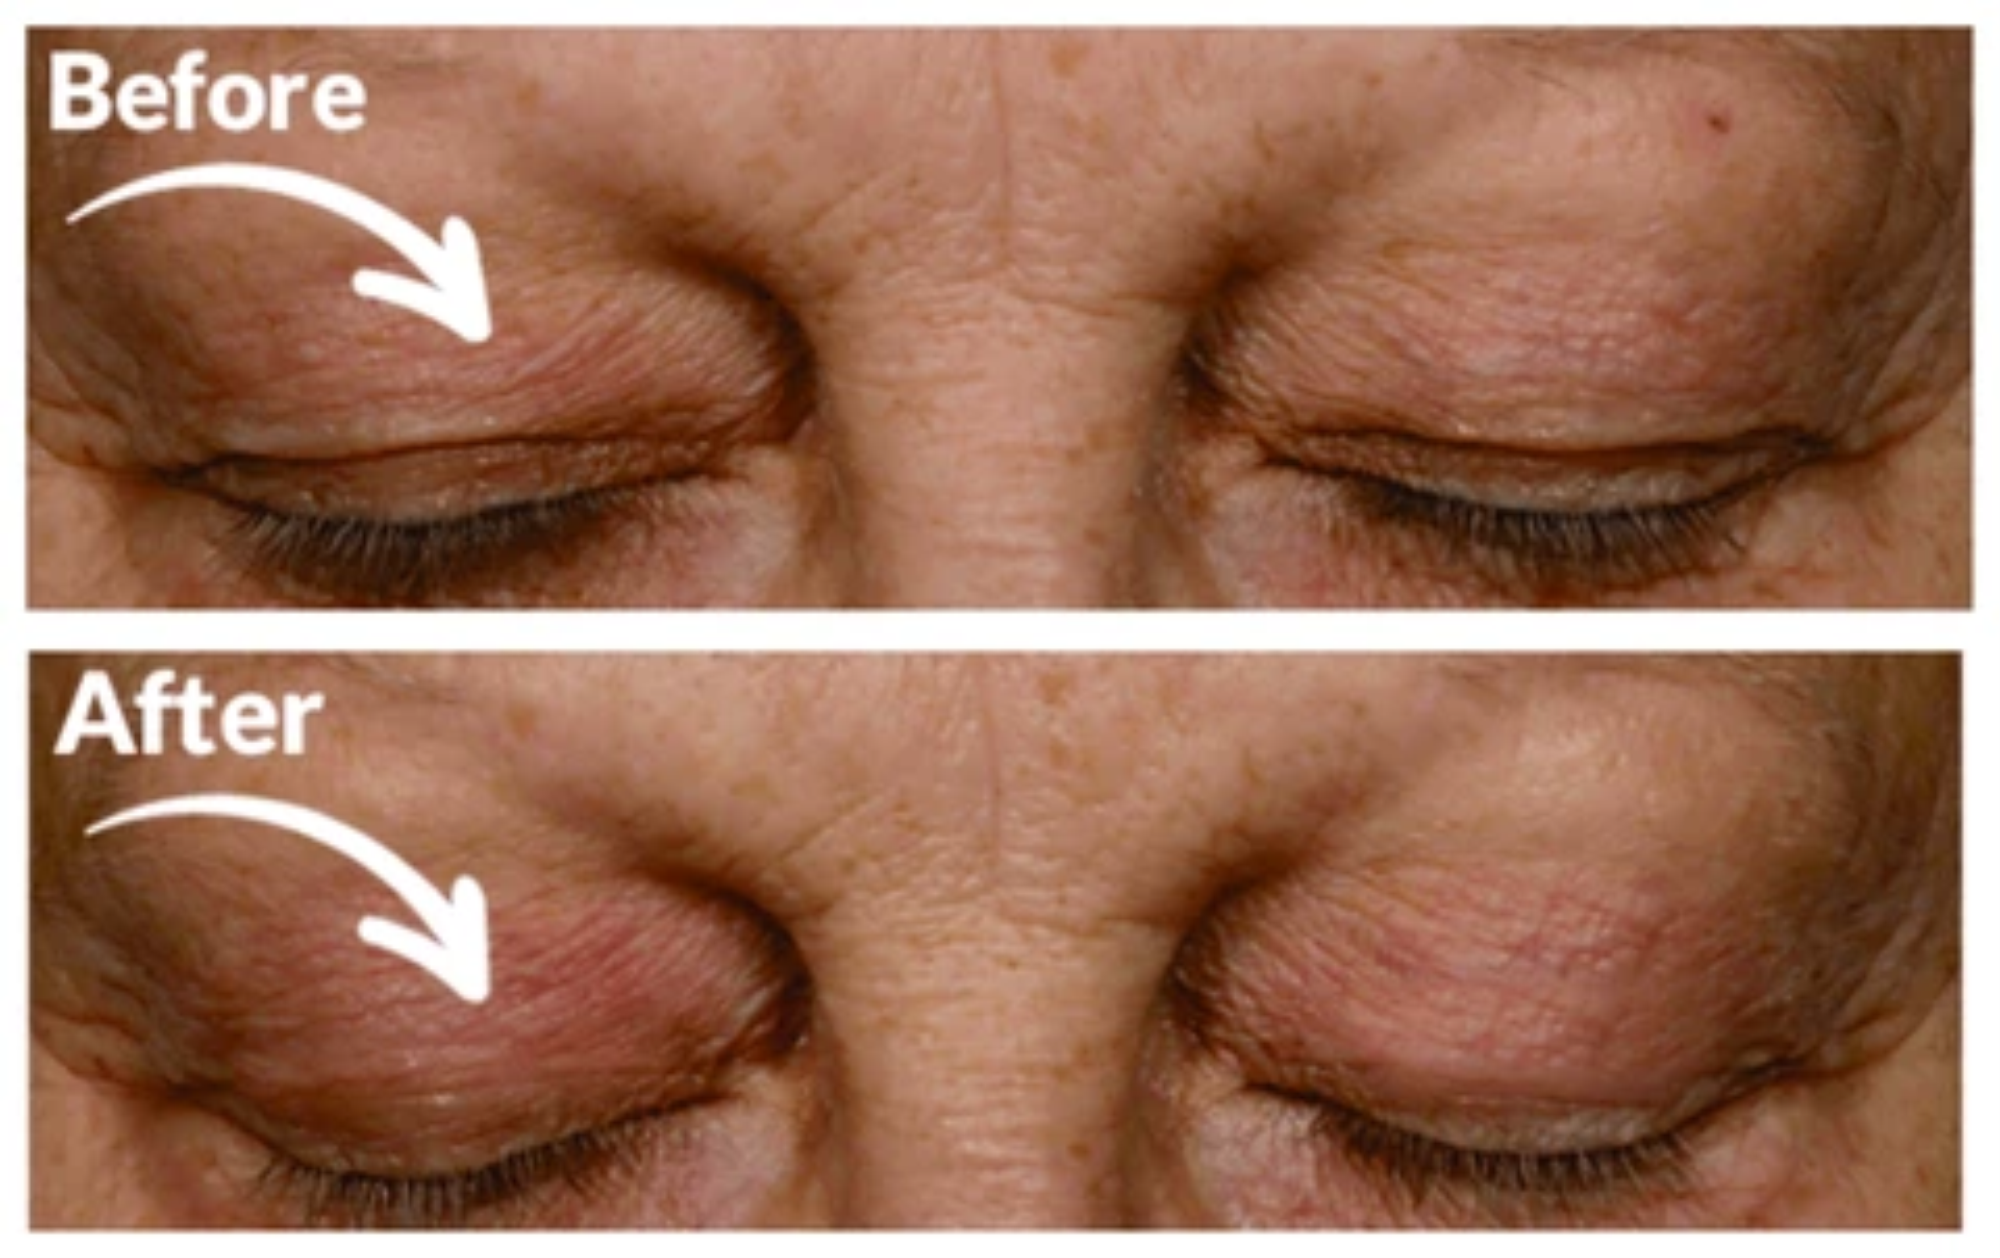 Front View Before and After Eyelids Image